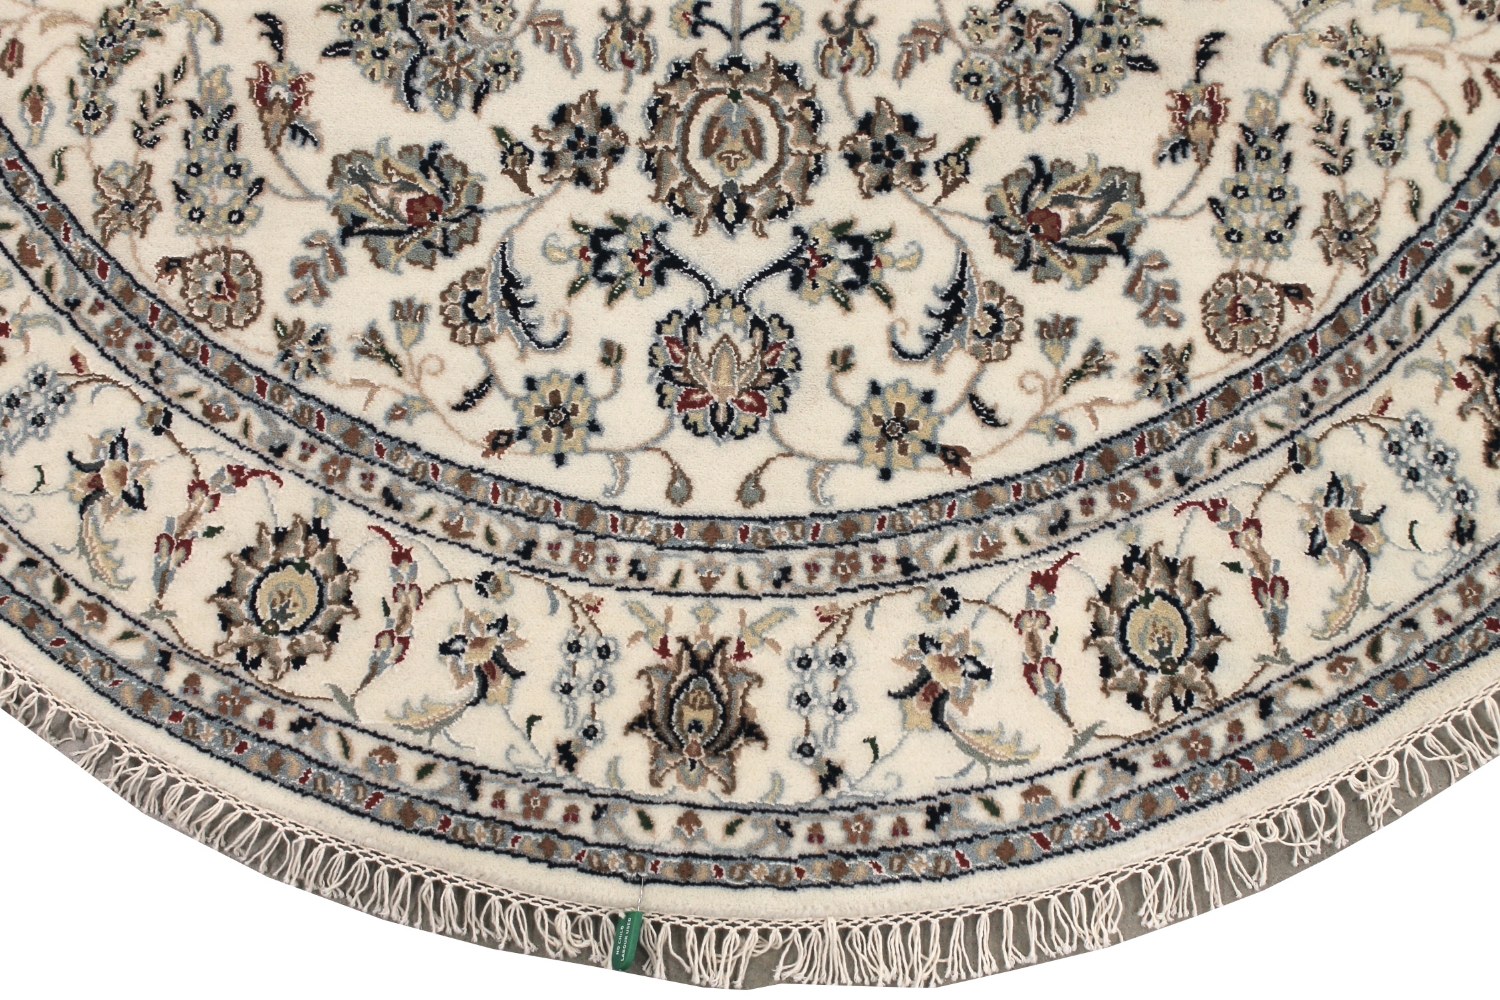 6 ft. - 7 ft. Round & Square Traditional Hand Knotted Wool Area Rug - MR028294